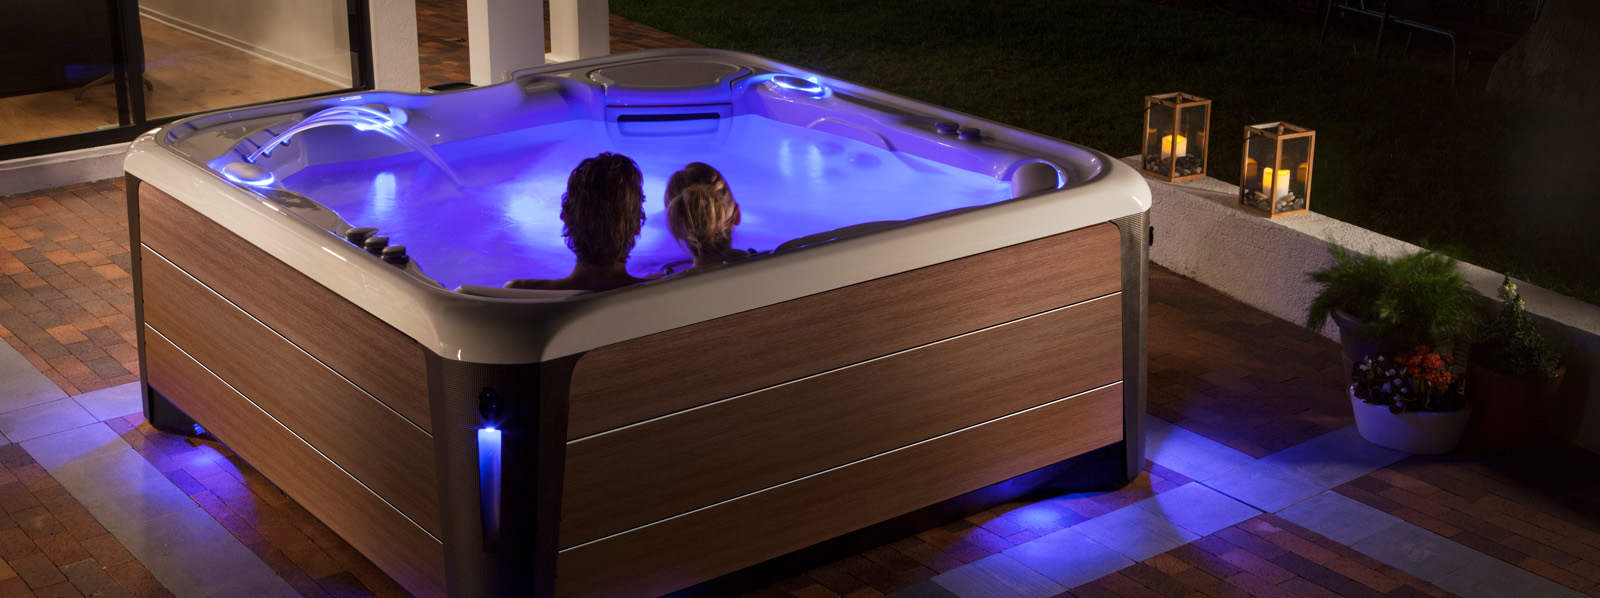 Hot Spring Spas Highlife Collection Hot Tub | Couple in hot tub in their Backyard